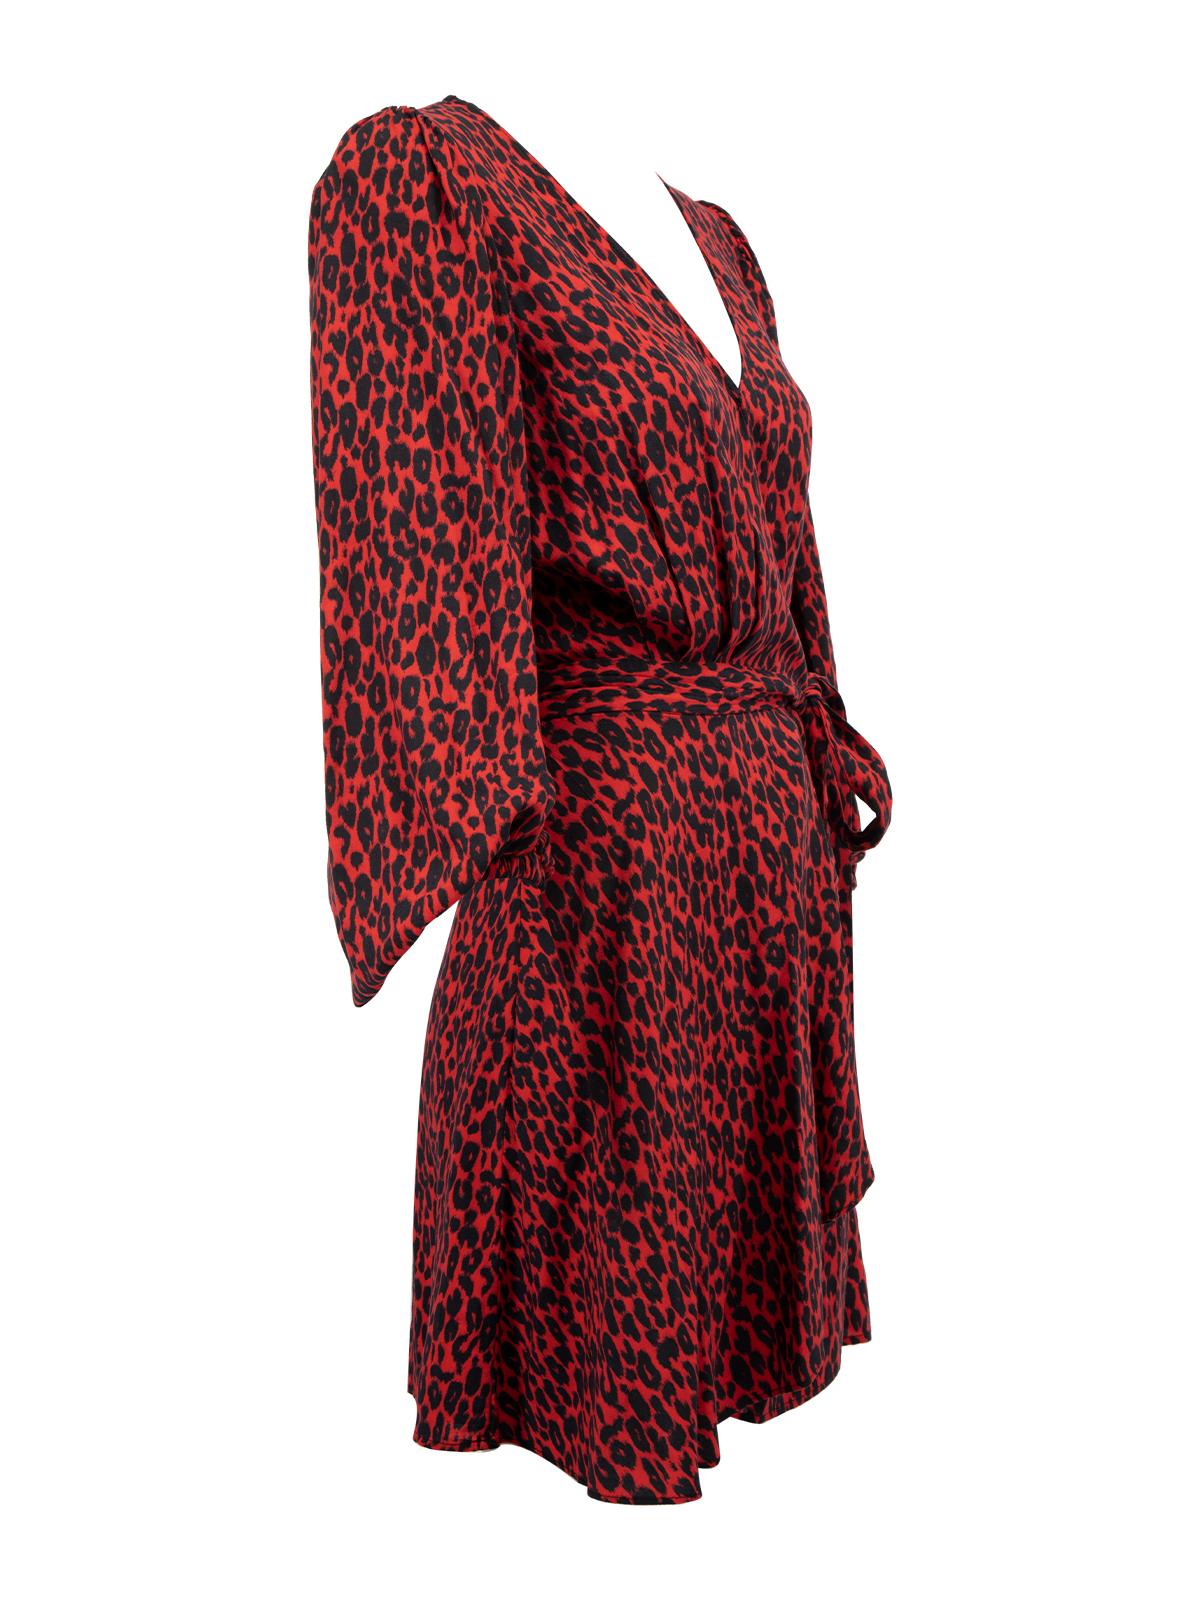 CONDITION is Never worn. No visible wear to dress is evident on this used Iro resale item.

Details
Red and Black
Rayon
Wrap dress
Leopard print
Long bishop sleeves
V neckline
Mini length
Hook and eye on chest
Button on waistline
Tie rope on side